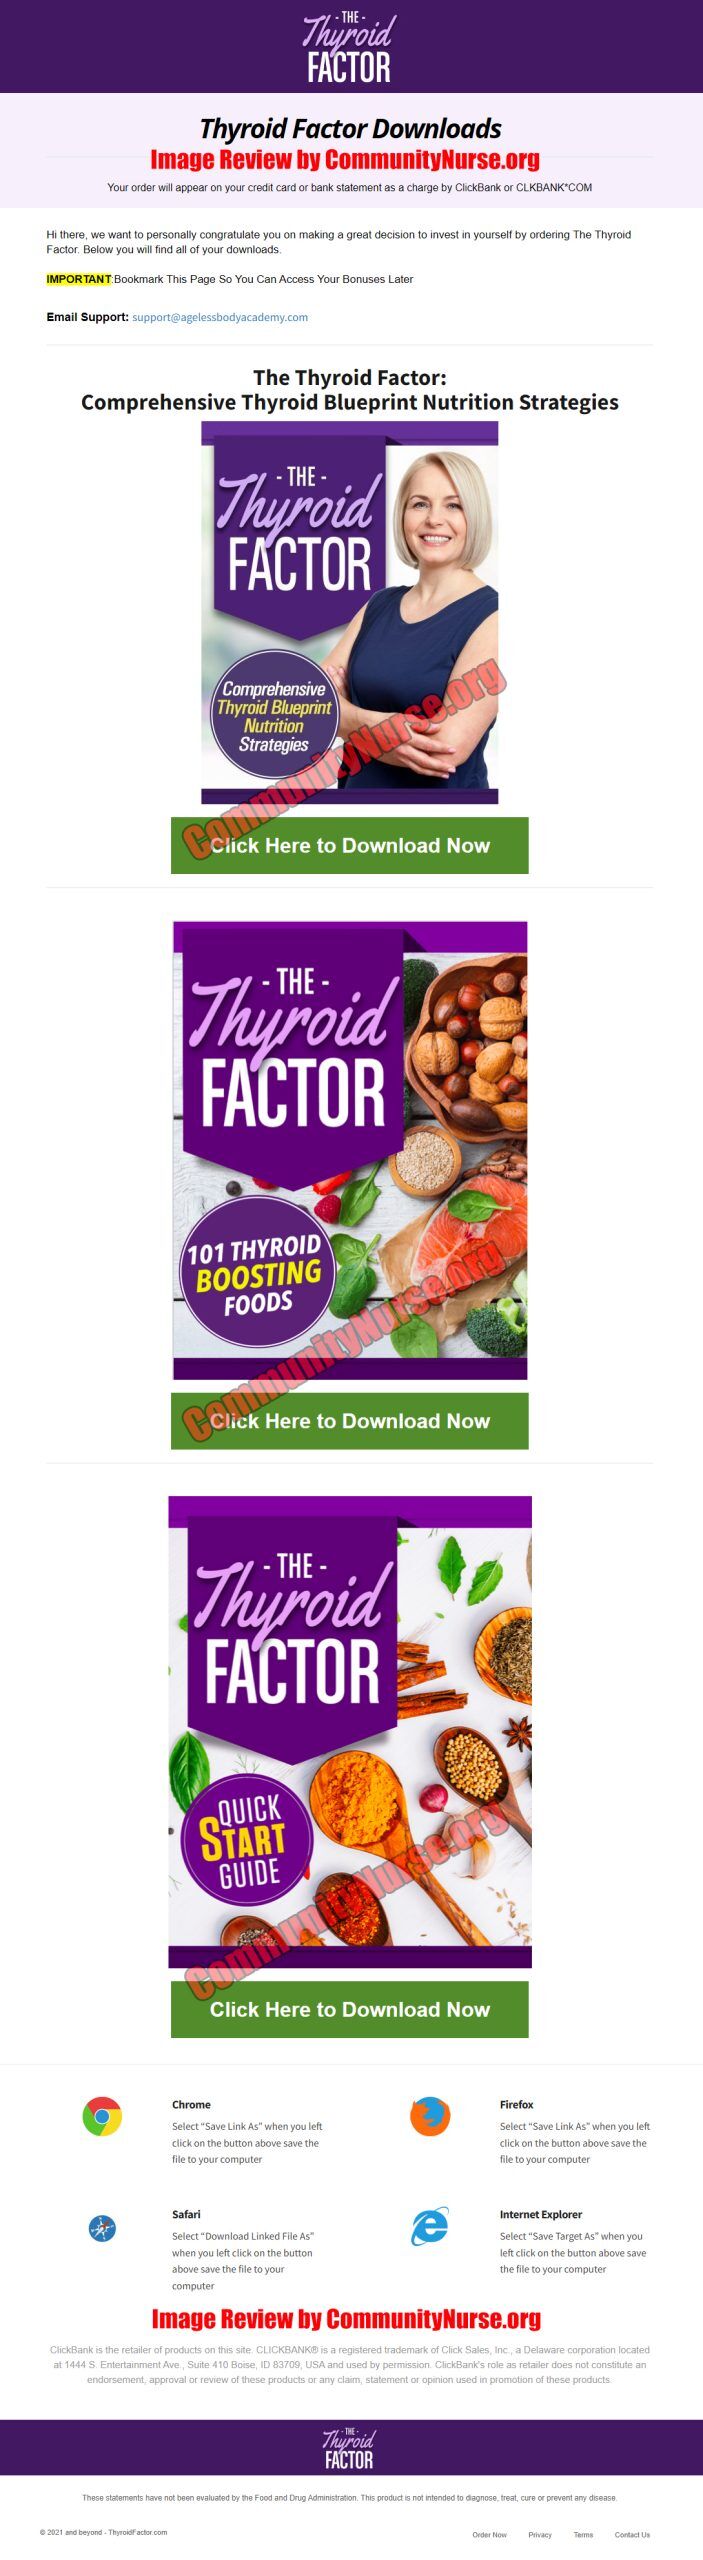 the thyroid factor download page